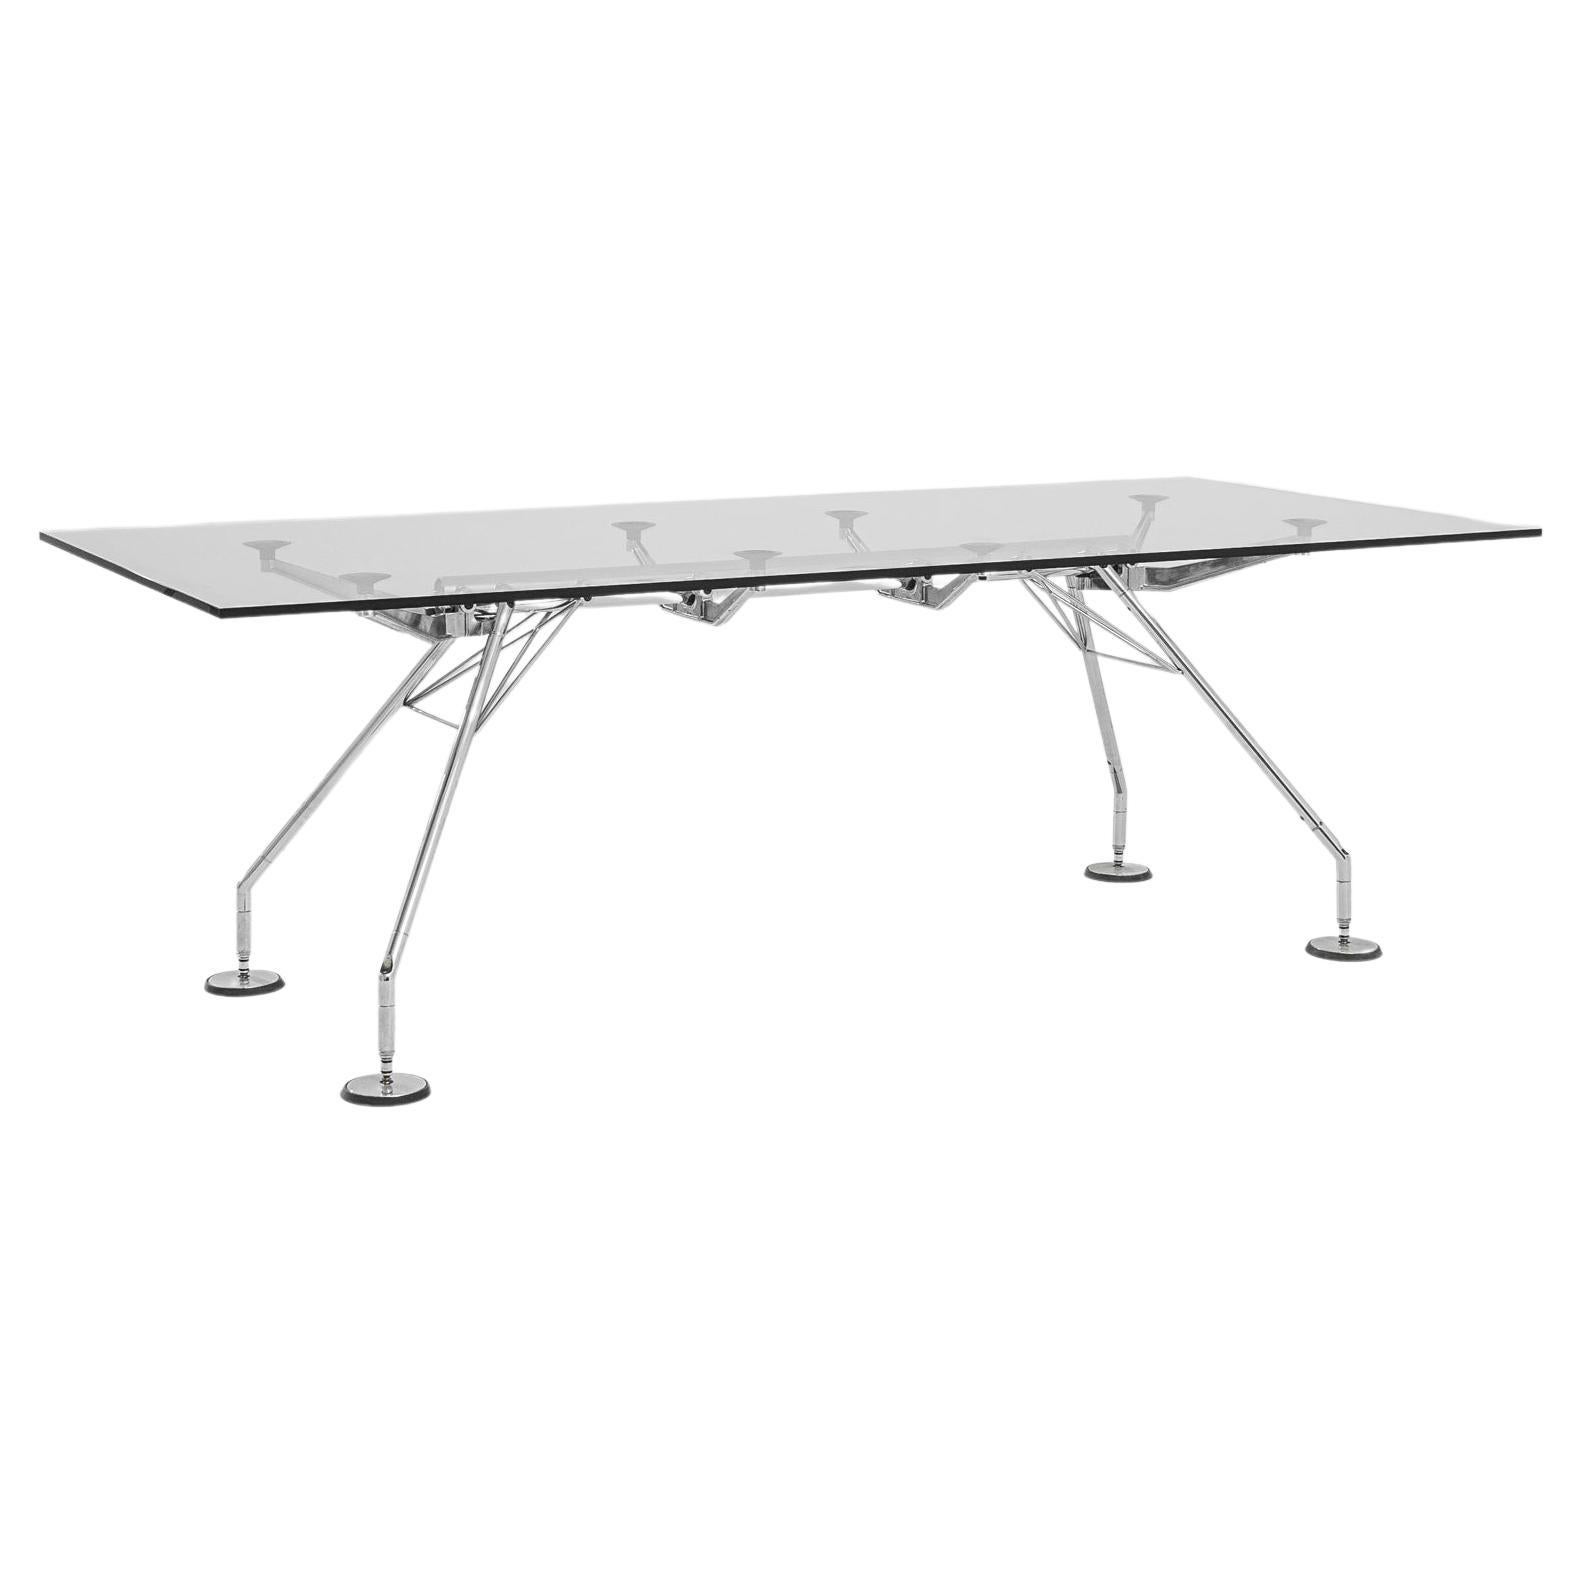 Italian, Metal and Glass Table by Norman Foster For Sale